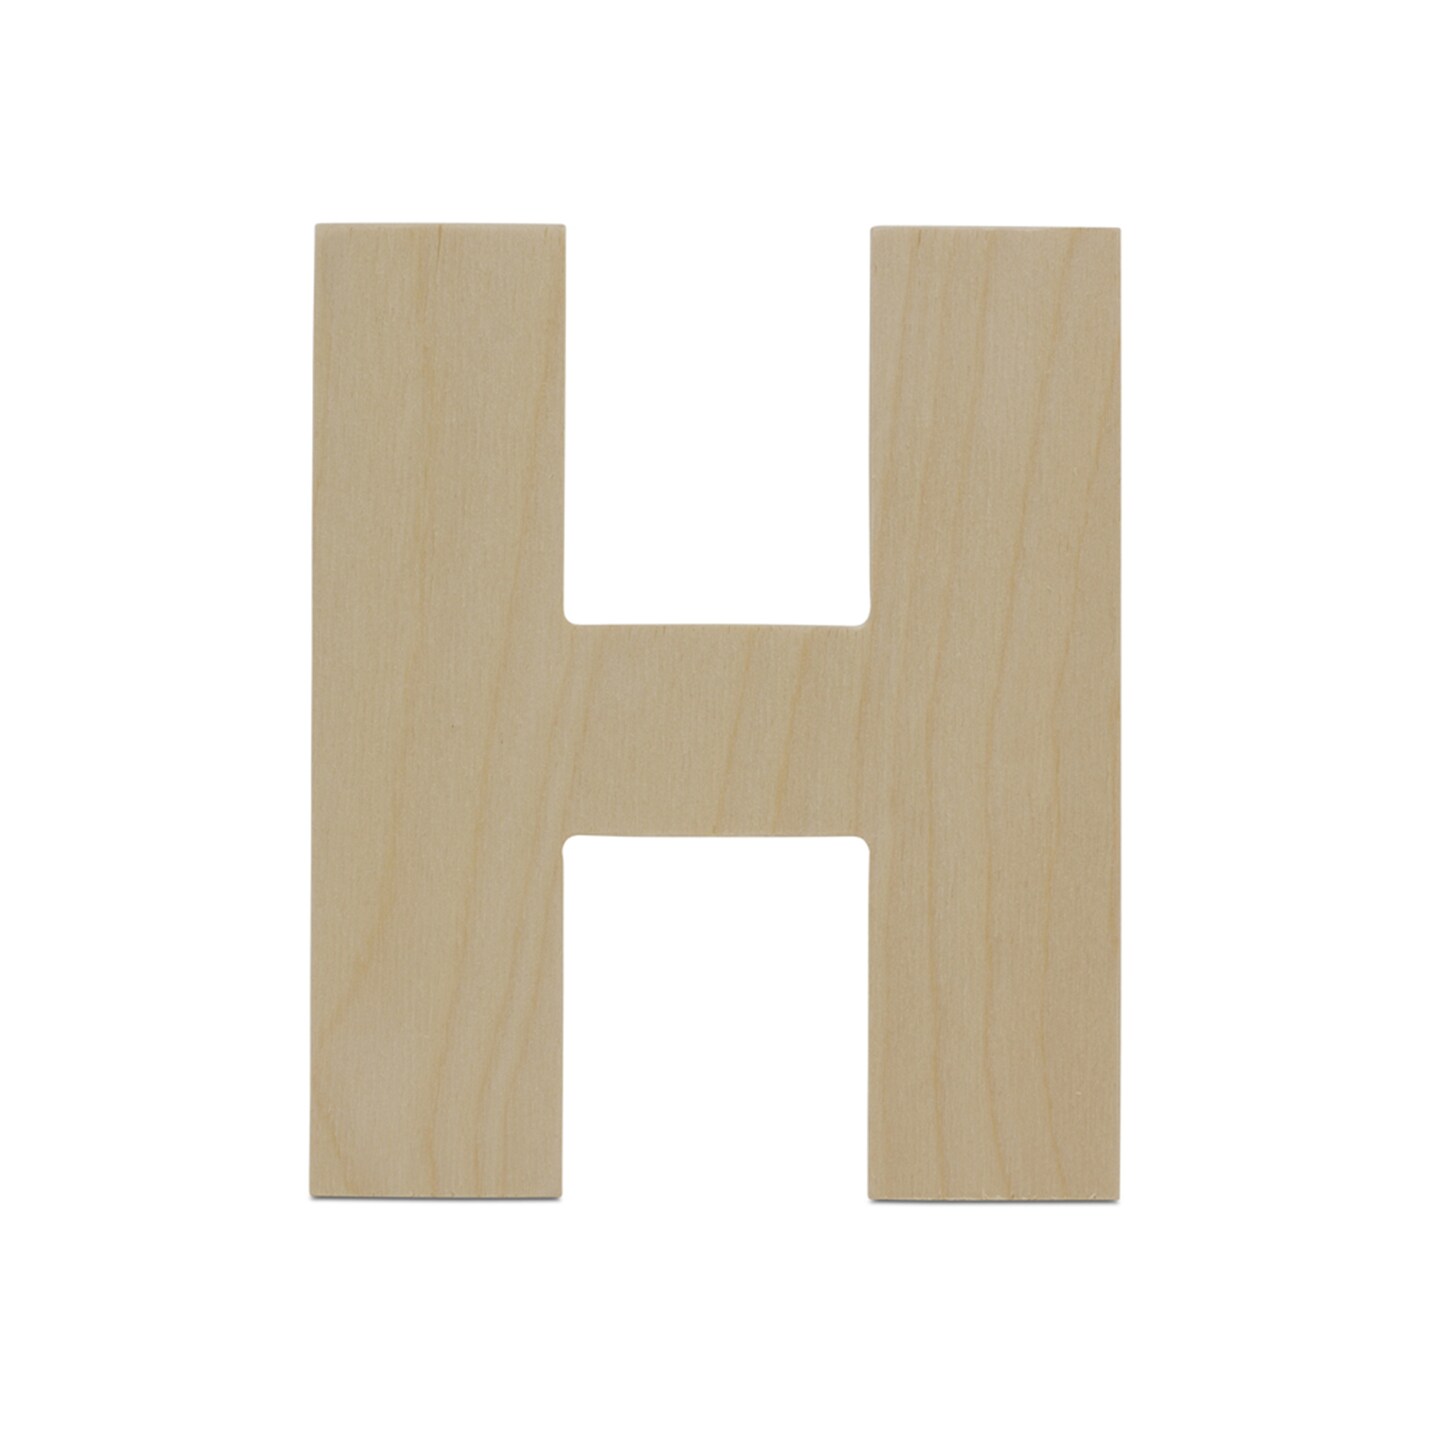 Wooden Letter H 12 inch or 8 inch, Unfinished Large Wood Letters for Crafts | Woodpeckers